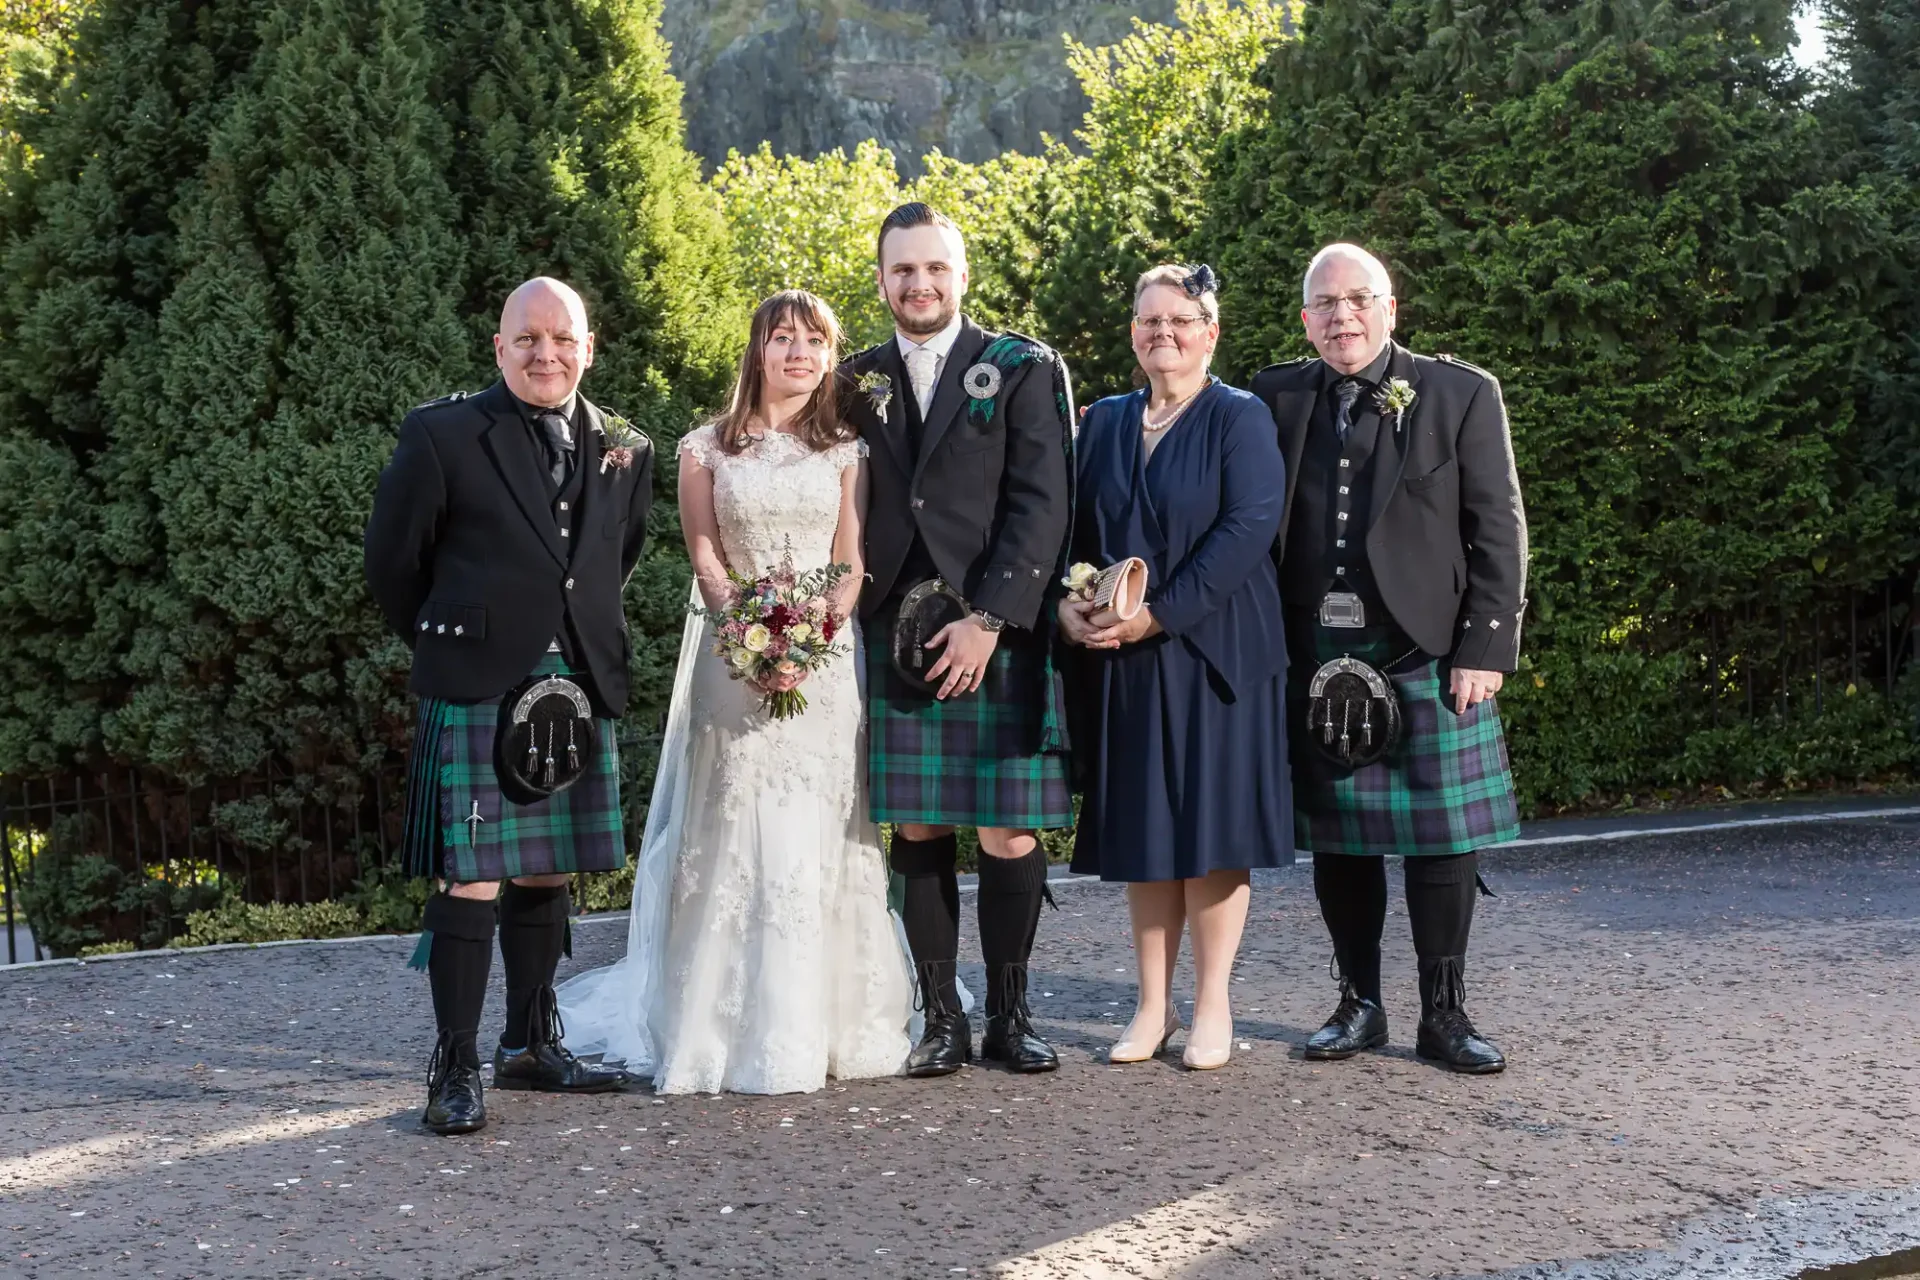 A wedding group with a bride, groom, and three others in traditional scottish attire, including kilts, posed outdoors with a backdrop of tall trees.